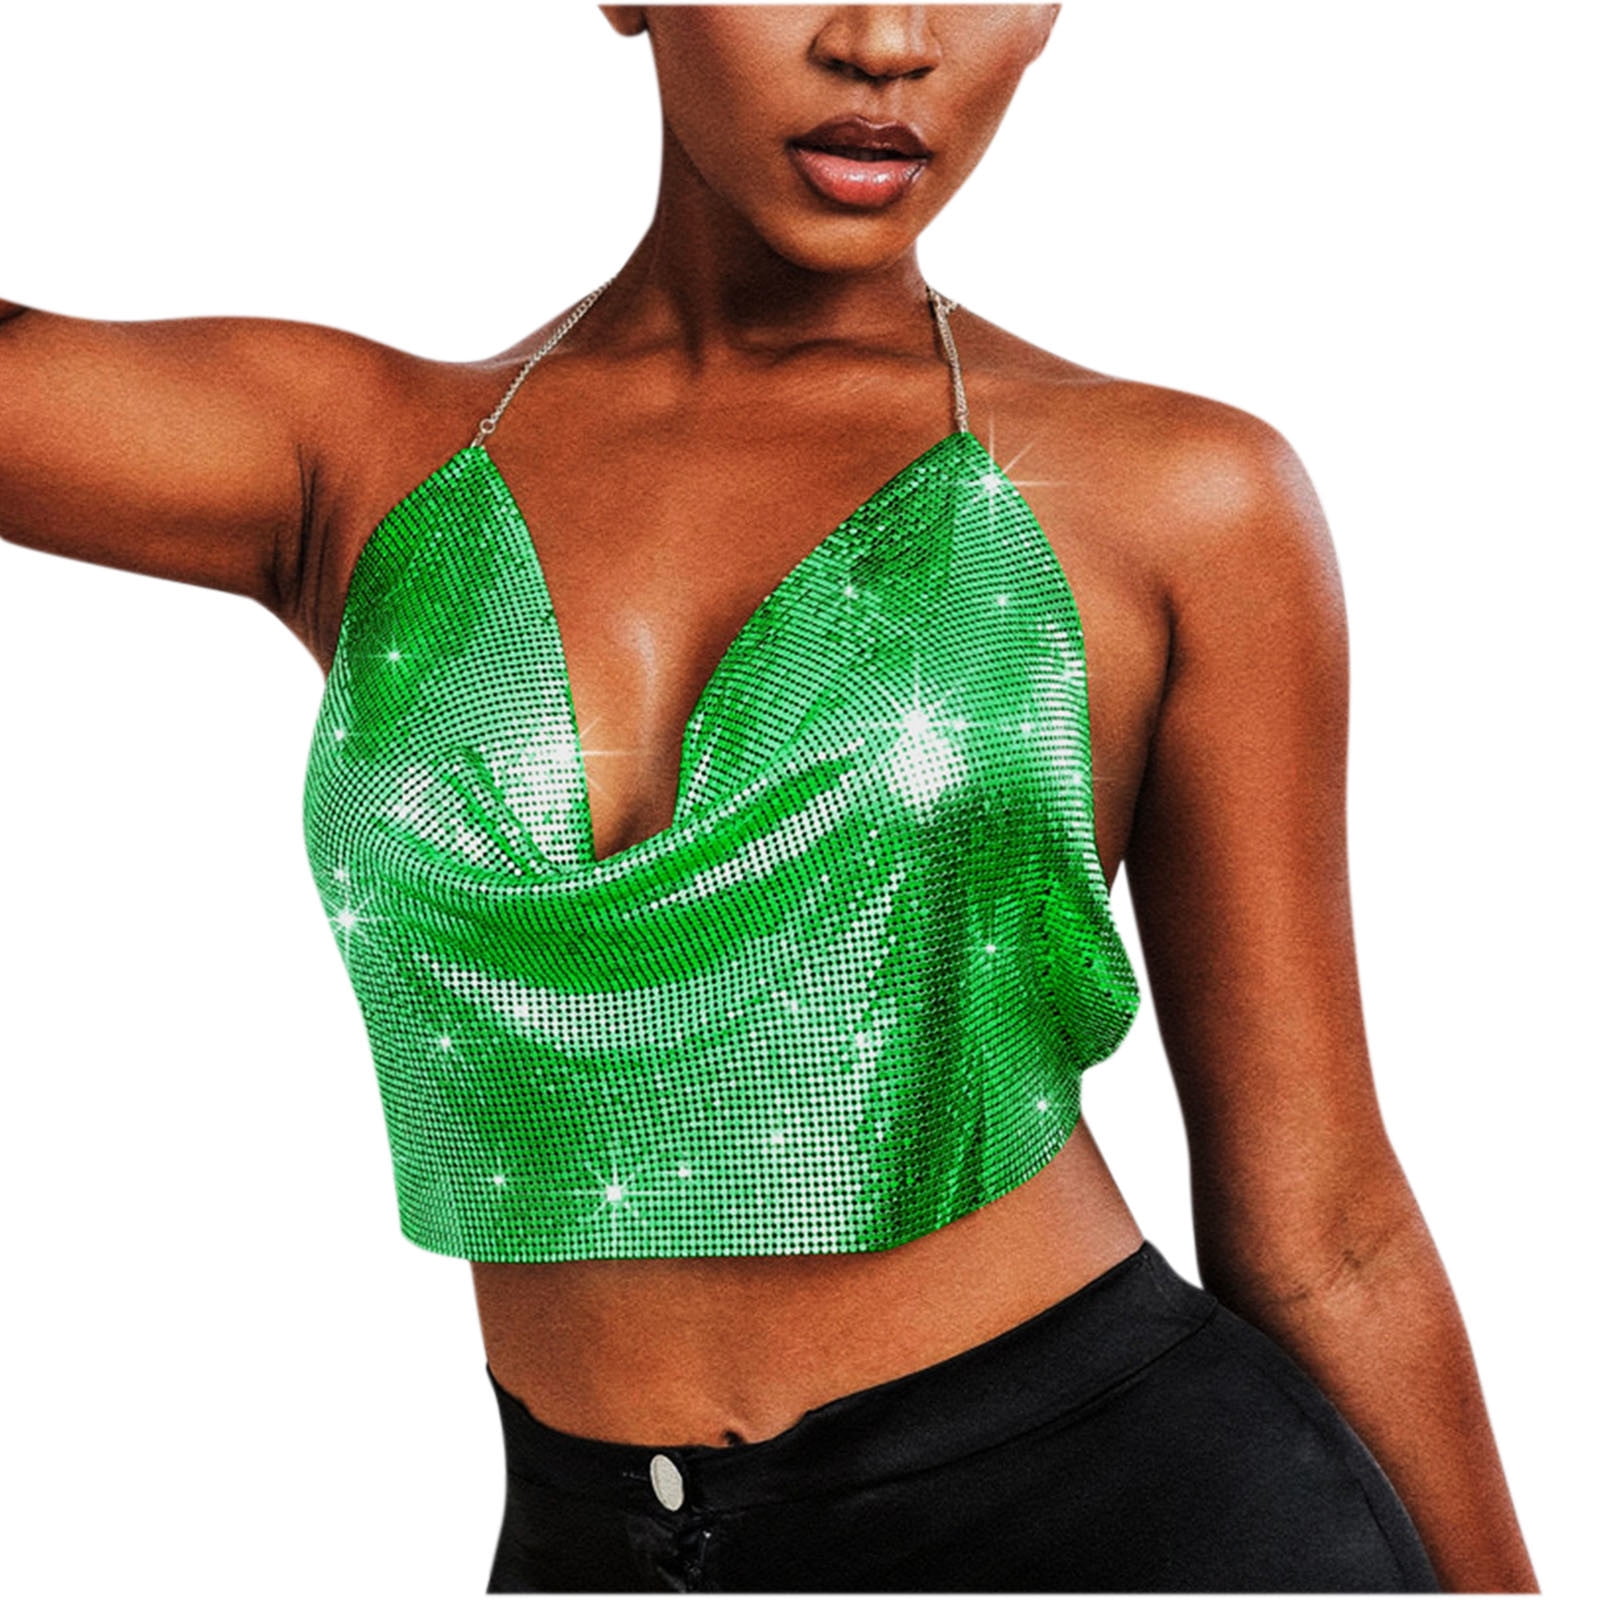 Green Sequin Strapless Crop Top With Bandeau Neckline And Sleeveless Design  For Women Sexy And Comfortable Culbwear From Hsaiiou, $6.51